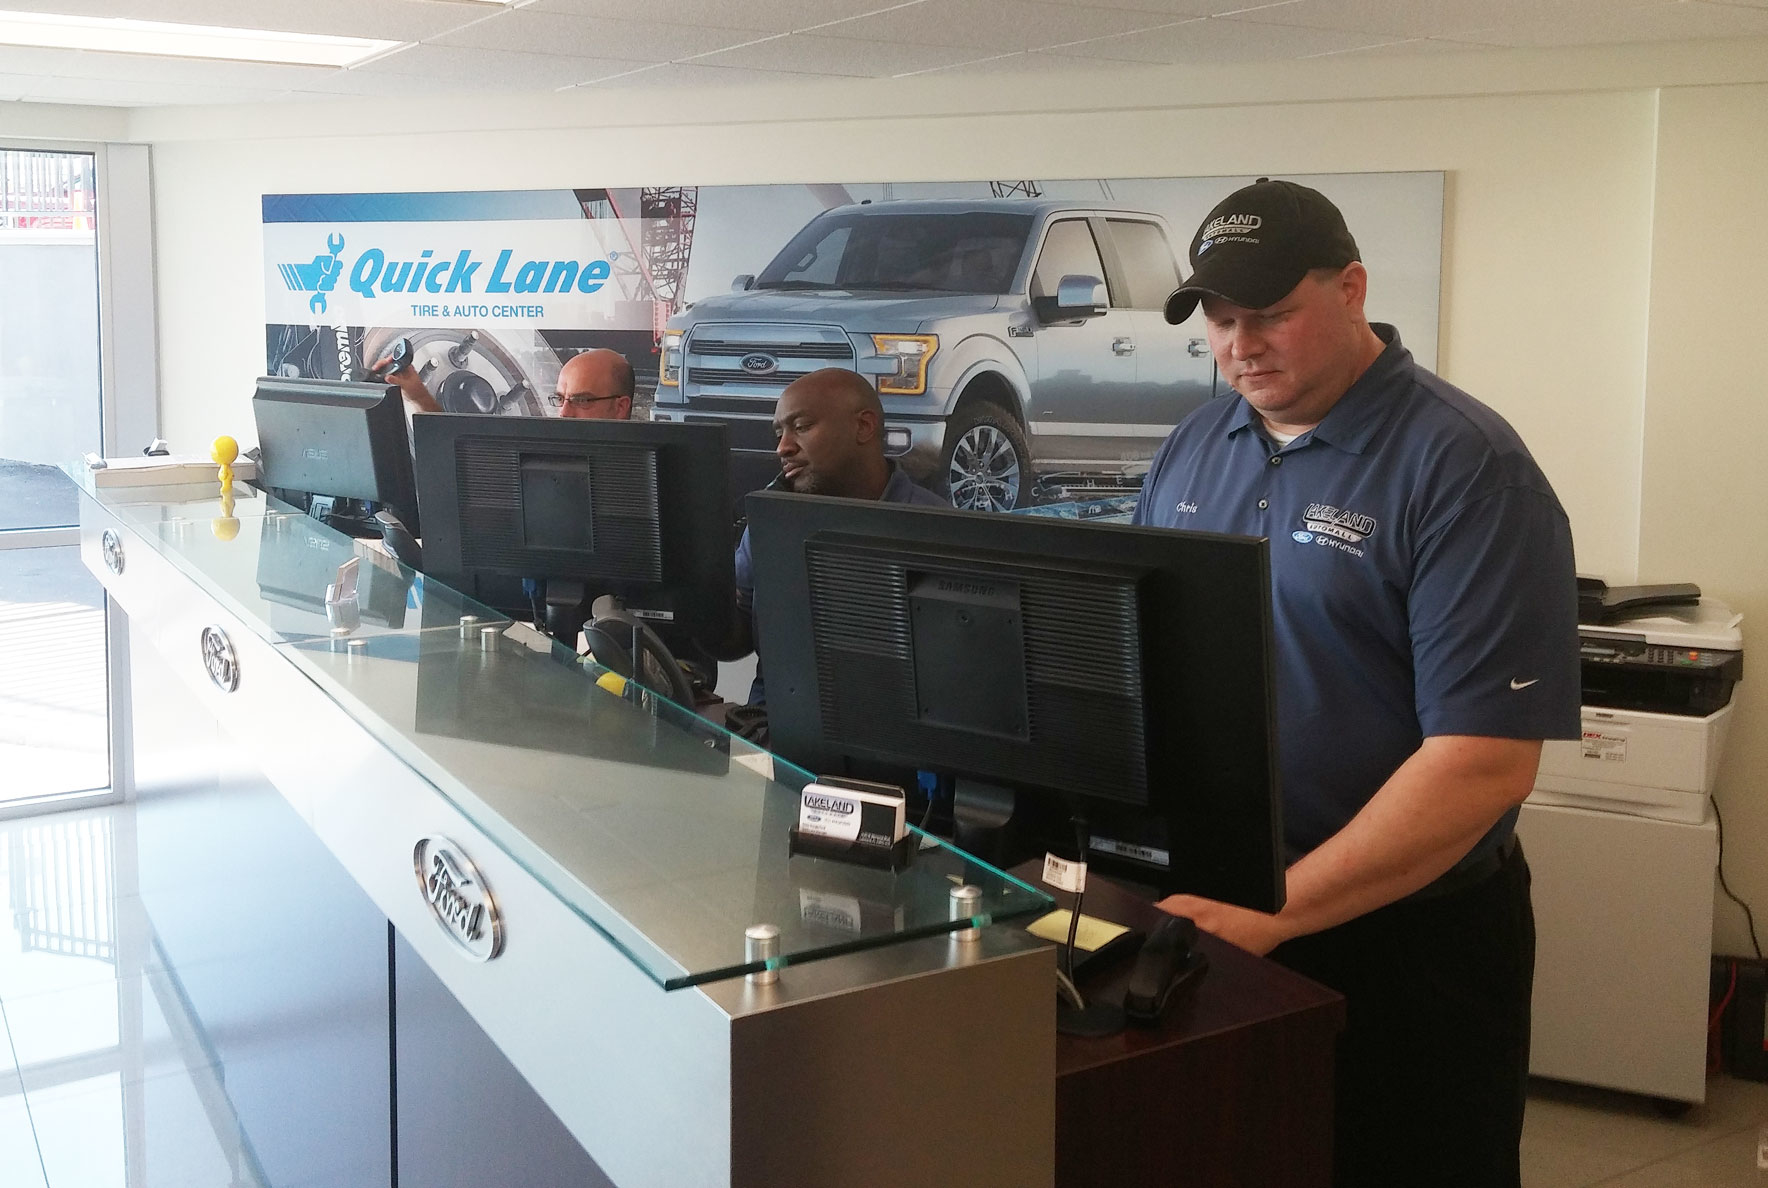 Ford QuickLane® is your one-stop shop for everything you need. Parts, service, auto collision center and body shop - If you need it, we have it! Don't waste your time anywhere else - Lakeland Automall has everything you need!